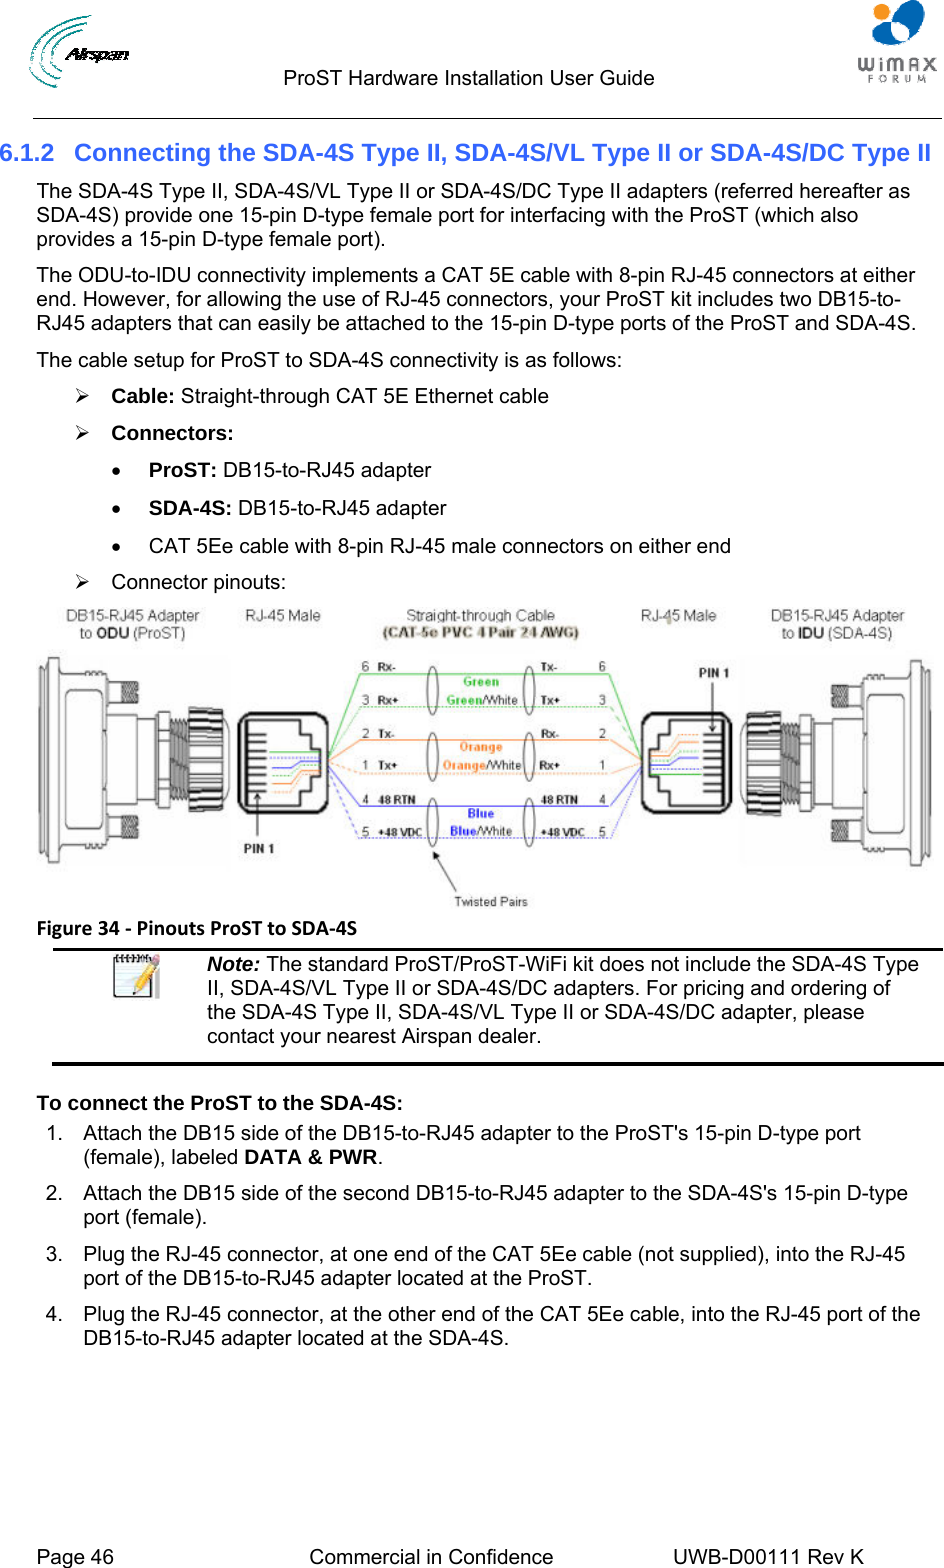                                  ProST Hardware Installation User Guide  Page 46  Commercial in Confidence  UWB-D00111 Rev K   6.1.2  Connecting the SDA-4S Type II, SDA-4S/VL Type II or SDA-4S/DC Type II The SDA-4S Type II, SDA-4S/VL Type II or SDA-4S/DC Type II adapters (referred hereafter as SDA-4S) provide one 15-pin D-type female port for interfacing with the ProST (which also provides a 15-pin D-type female port).  The ODU-to-IDU connectivity implements a CAT 5E cable with 8-pin RJ-45 connectors at either end. However, for allowing the use of RJ-45 connectors, your ProST kit includes two DB15-to-RJ45 adapters that can easily be attached to the 15-pin D-type ports of the ProST and SDA-4S. The cable setup for ProST to SDA-4S connectivity is as follows: ¾ Cable: Straight-through CAT 5E Ethernet cable ¾ Connectors:  • ProST: DB15-to-RJ45 adapter • SDA-4S: DB15-to-RJ45 adapter •  CAT 5Ee cable with 8-pin RJ-45 male connectors on either end ¾ Connector pinouts:  Figure34‐PinoutsProSTtoSDA‐4S Note: The standard ProST/ProST-WiFi kit does not include the SDA-4S Type II, SDA-4S/VL Type II or SDA-4S/DC adapters. For pricing and ordering of the SDA-4S Type II, SDA-4S/VL Type II or SDA-4S/DC adapter, please contact your nearest Airspan dealer.  To connect the ProST to the SDA-4S: 1.  Attach the DB15 side of the DB15-to-RJ45 adapter to the ProST&apos;s 15-pin D-type port (female), labeled DATA &amp; PWR. 2.  Attach the DB15 side of the second DB15-to-RJ45 adapter to the SDA-4S&apos;s 15-pin D-type port (female). 3.  Plug the RJ-45 connector, at one end of the CAT 5Ee cable (not supplied), into the RJ-45 port of the DB15-to-RJ45 adapter located at the ProST. 4.  Plug the RJ-45 connector, at the other end of the CAT 5Ee cable, into the RJ-45 port of the DB15-to-RJ45 adapter located at the SDA-4S. 